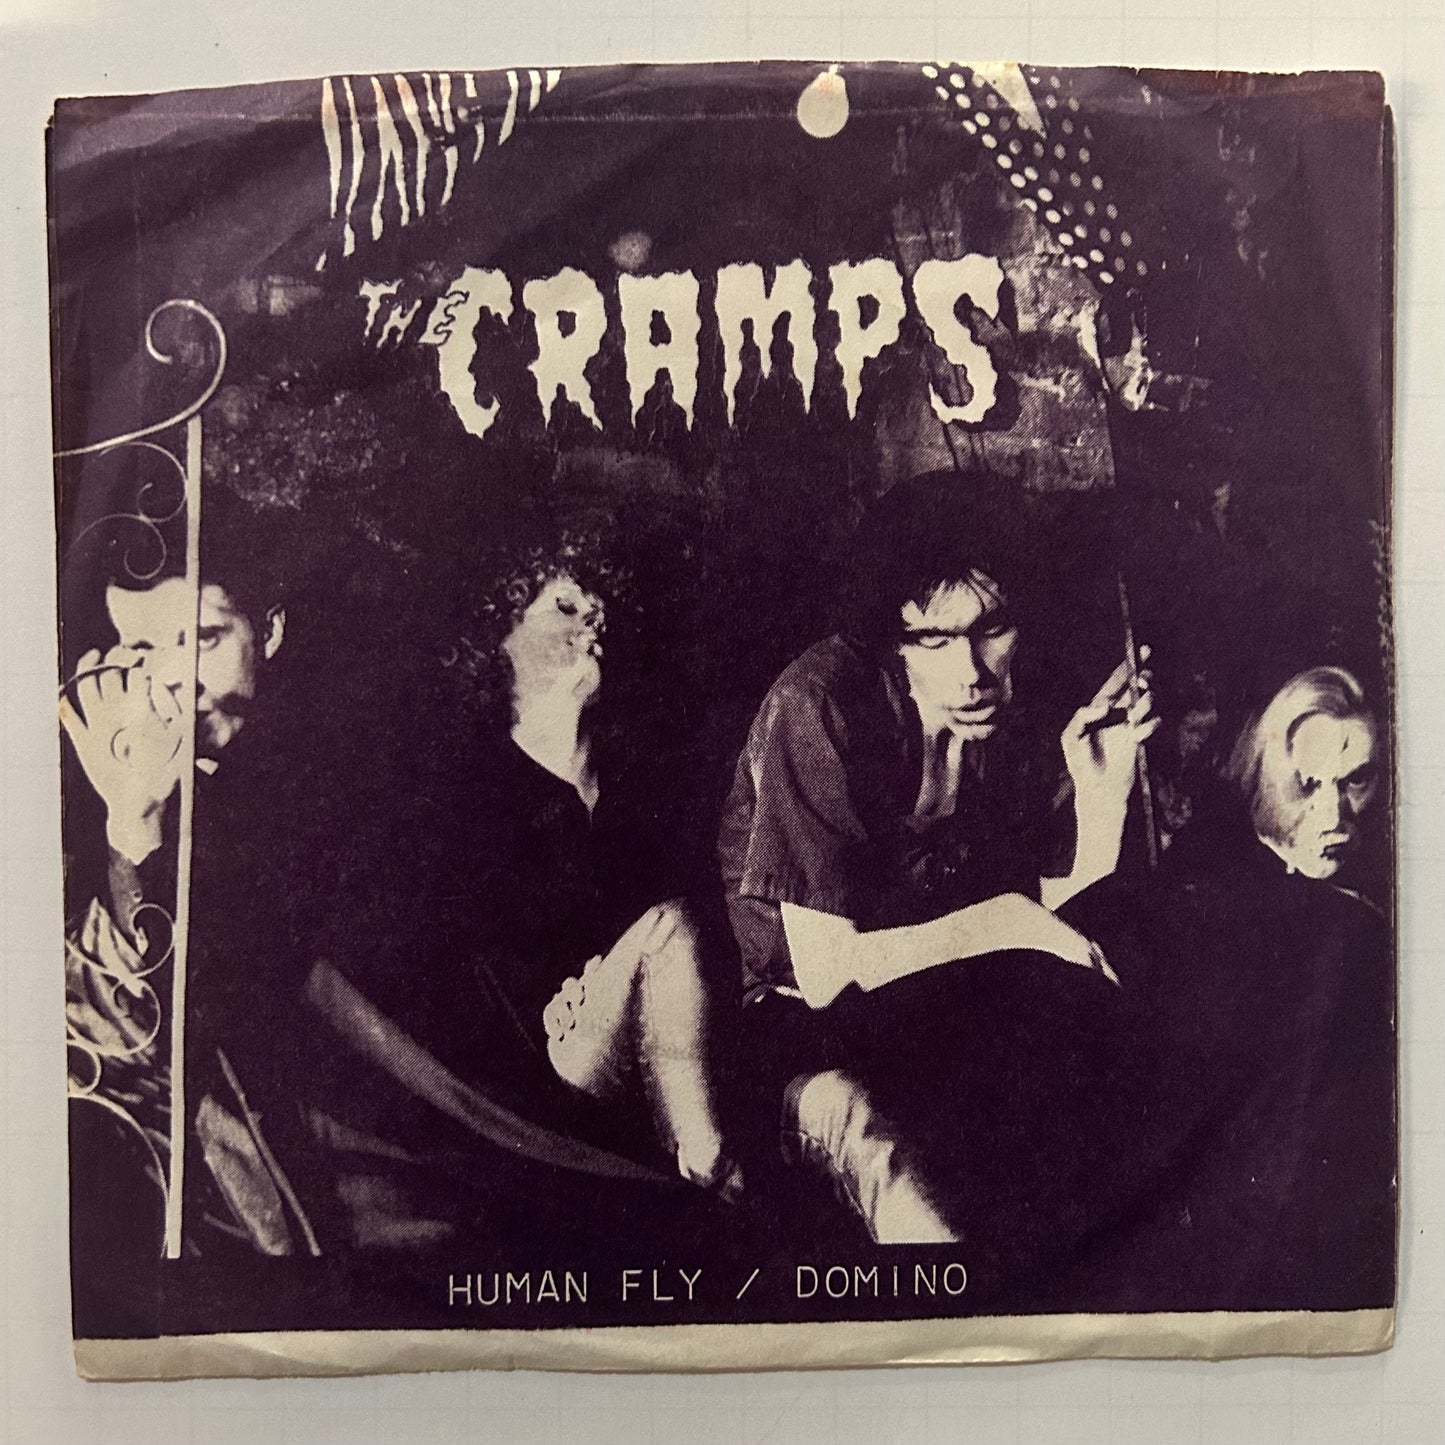 Cramps “Human Fly / Domino” 7”